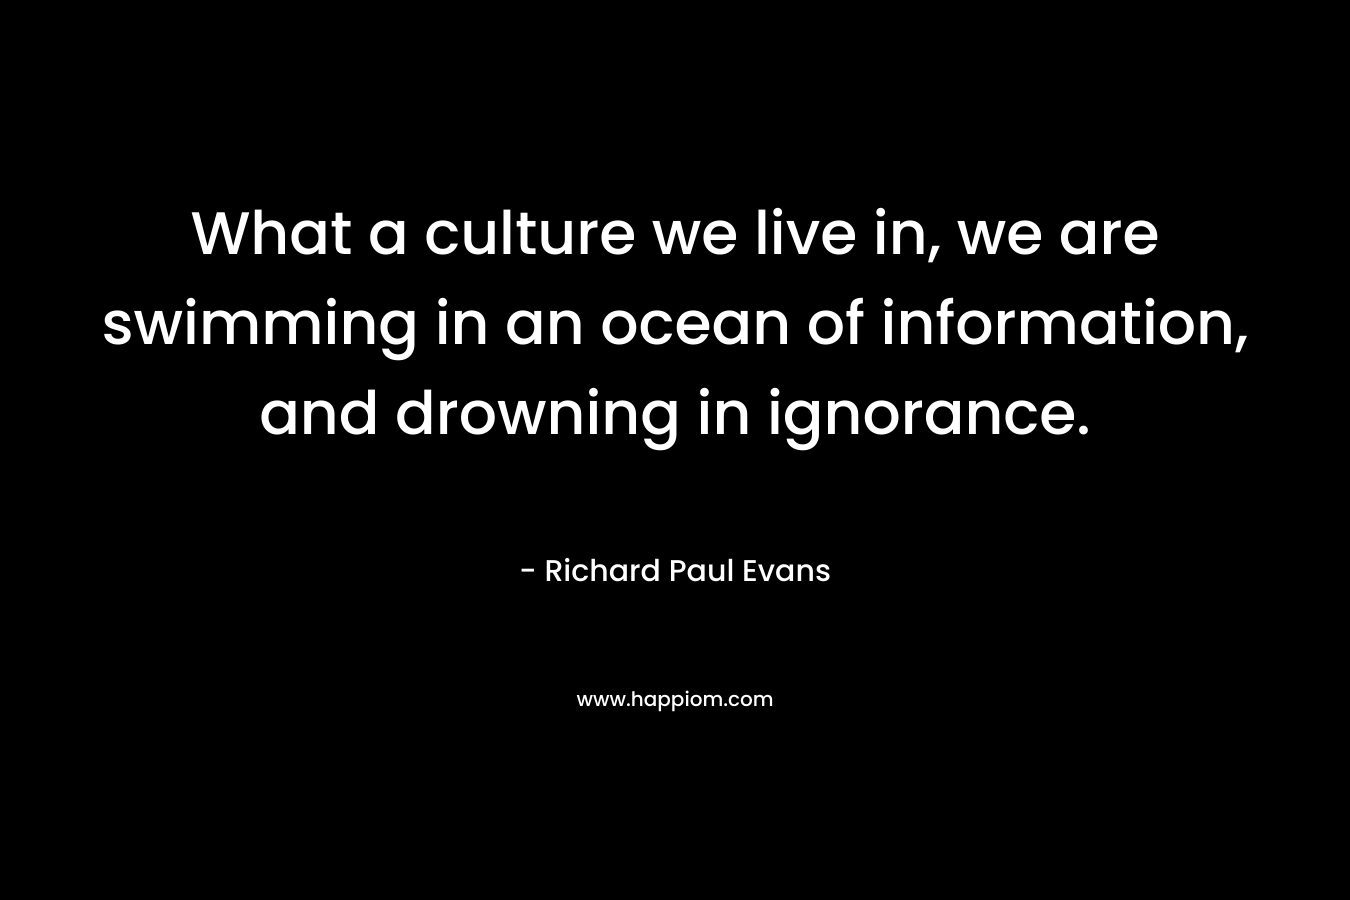 What a culture we live in, we are swimming in an ocean of information, and drowning in ignorance.